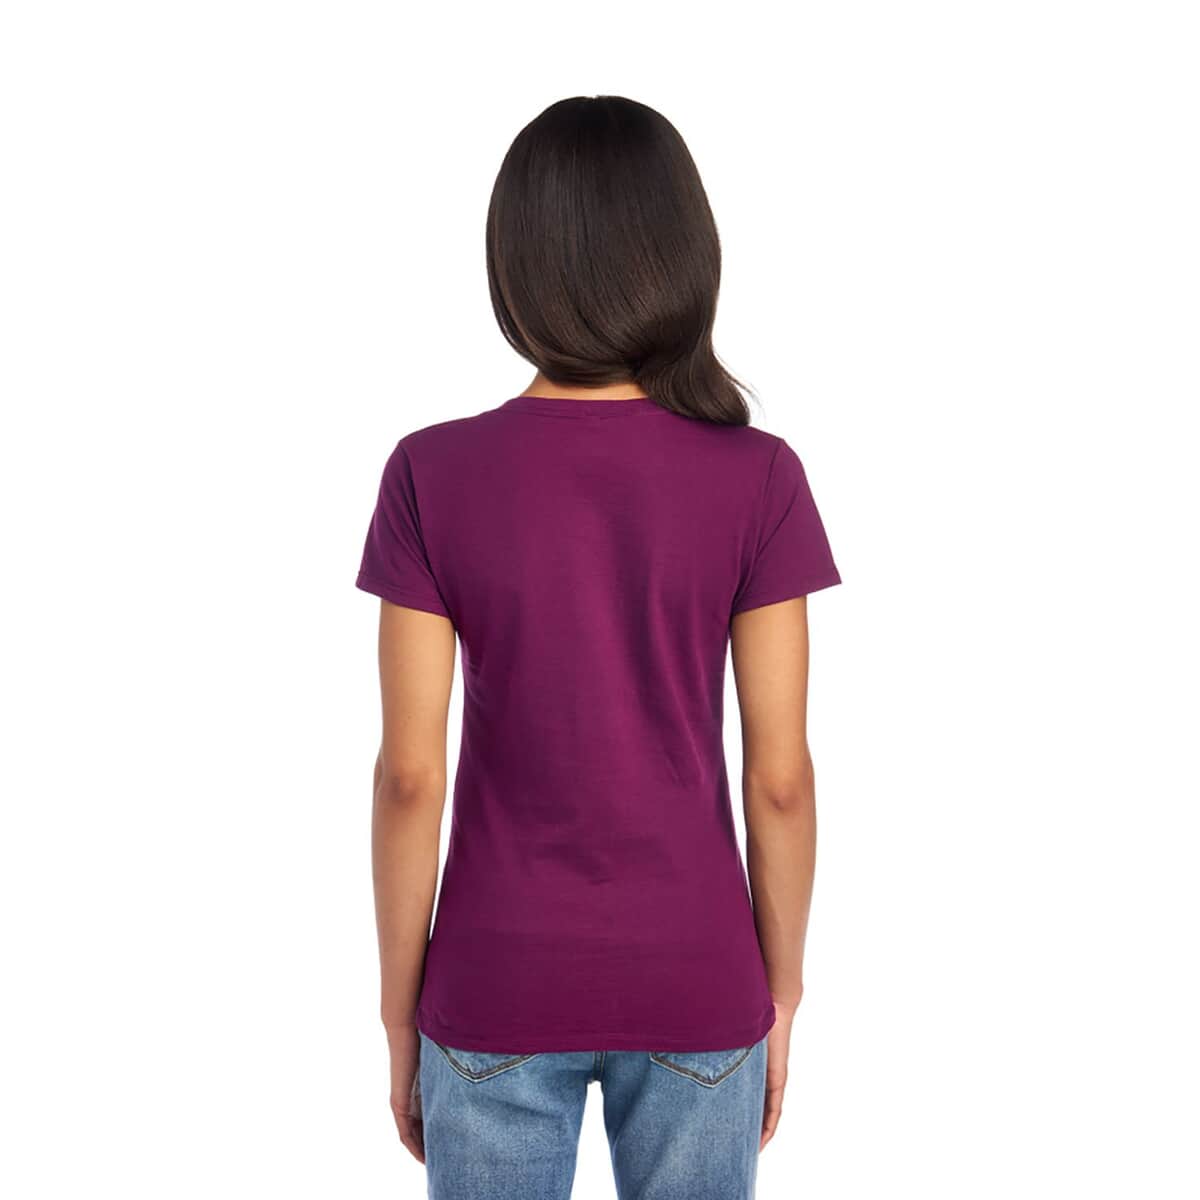 2 Pack- FRUIT OF THE LOOM 100% Cotton V-Neck T-shirts - Navy and Plum-L (Shipped in 8-10 days) image number 2